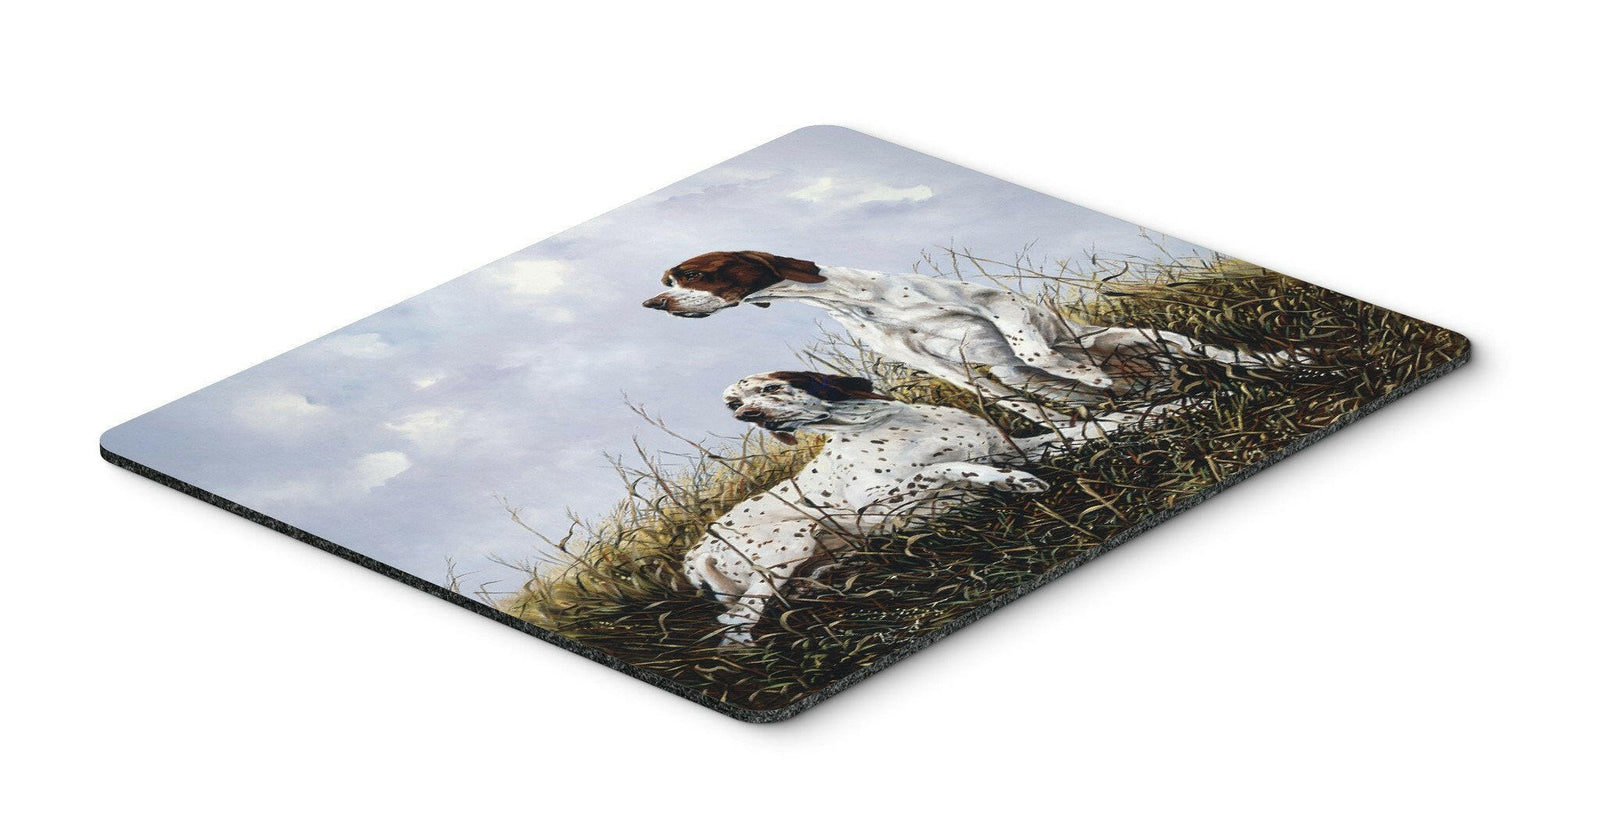 English Pointer by Michael Herring Mouse Pad, Hot Pad or Trivet HMHE0011MP by Caroline's Treasures